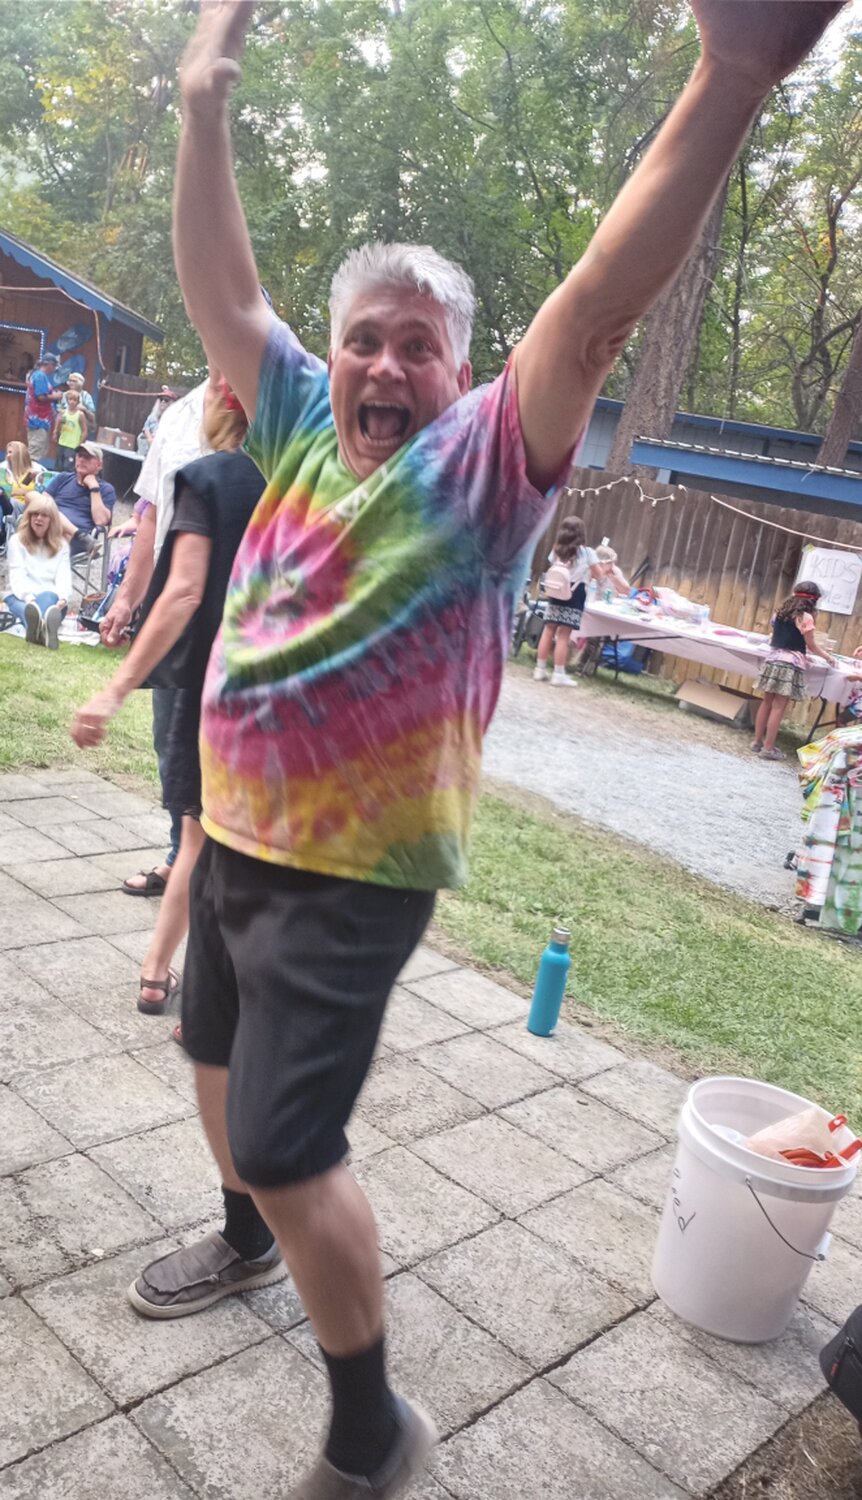 Greg Wright, drummer for Waterdog, shows off his dance moves.
Courtesy Catharine Morehead